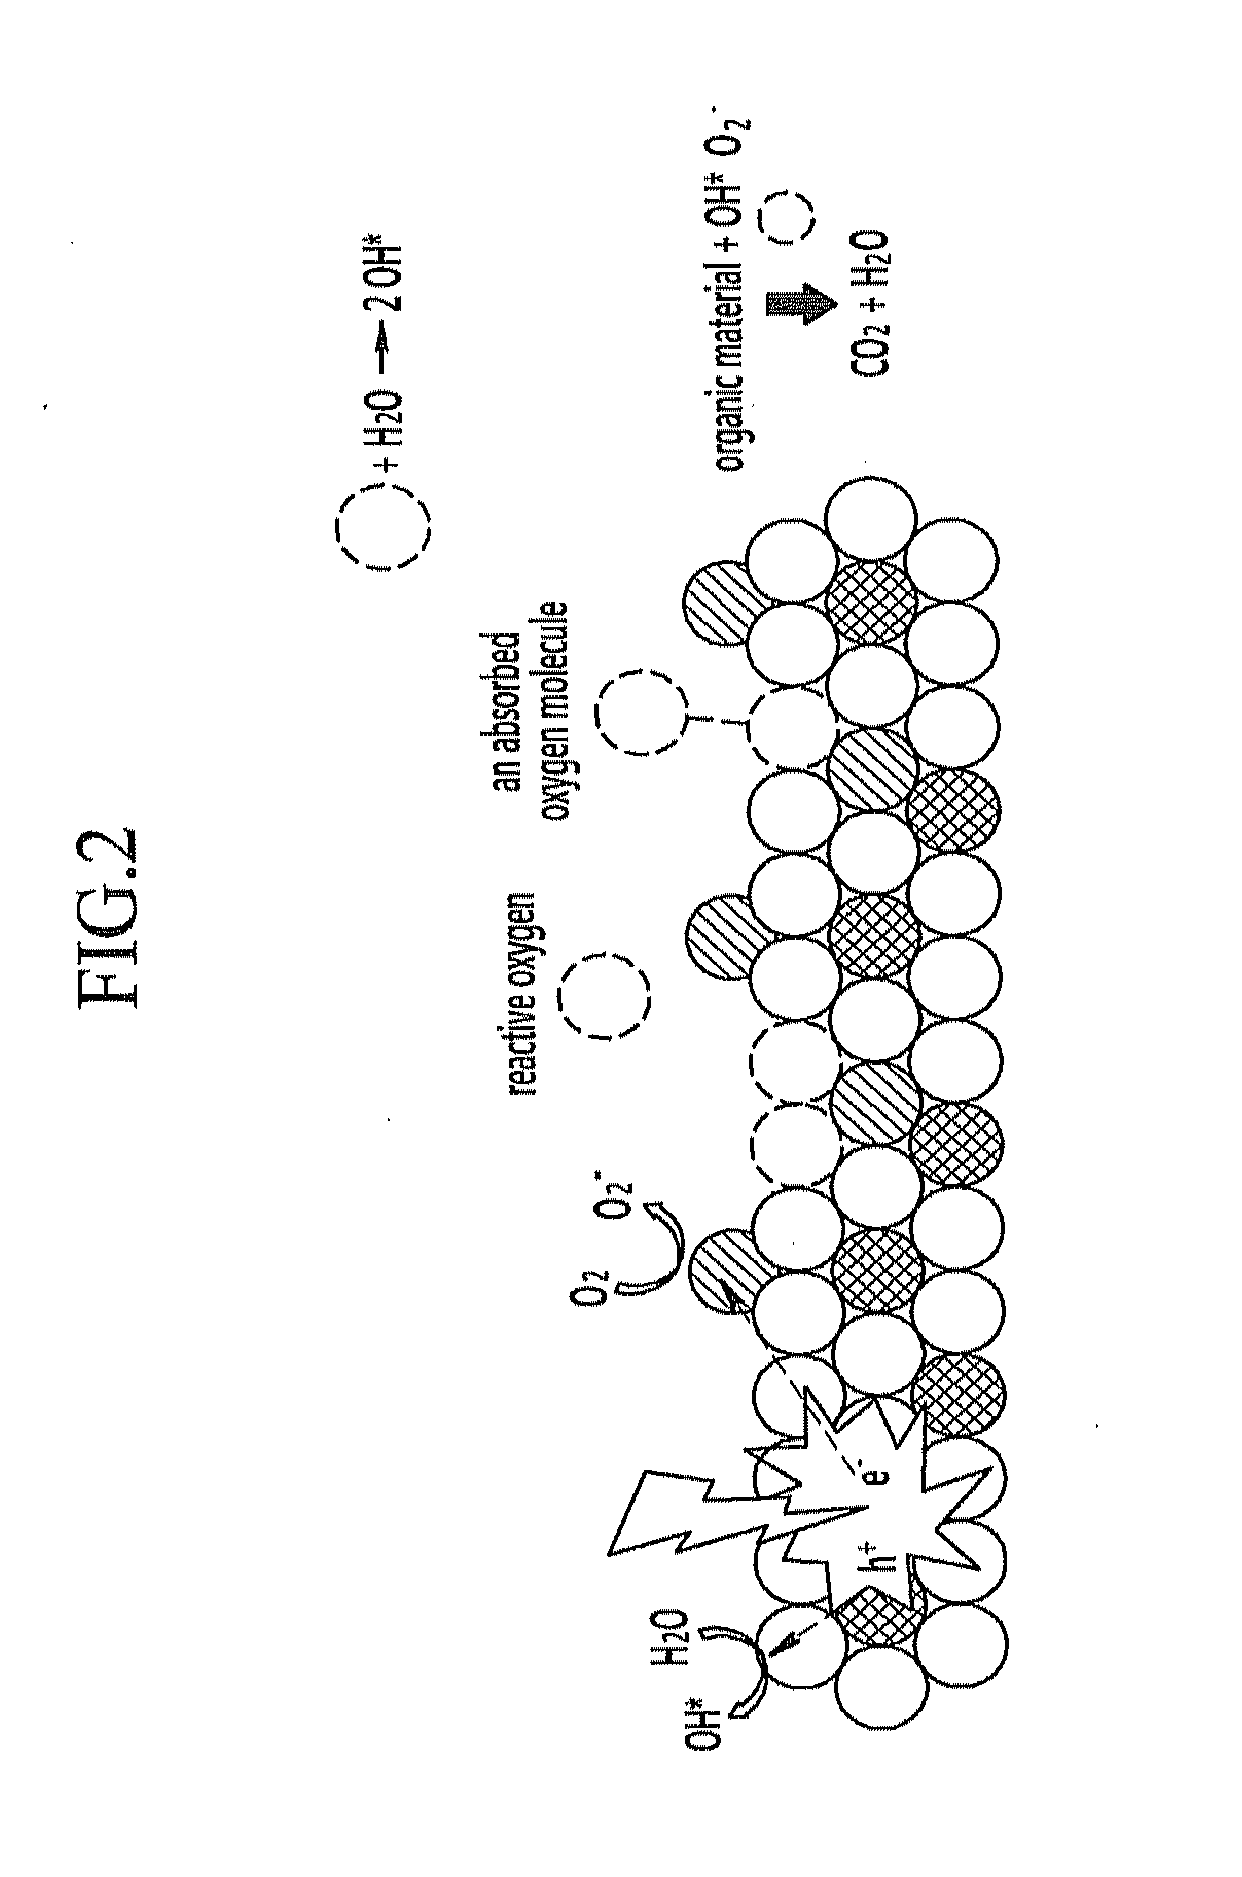 Photocatalyst, Method Of Preparing The Same, Decomposer For Organic Compound Using Photocatalyst, And Device For Organic Waste Disposal Using Photocatalyst